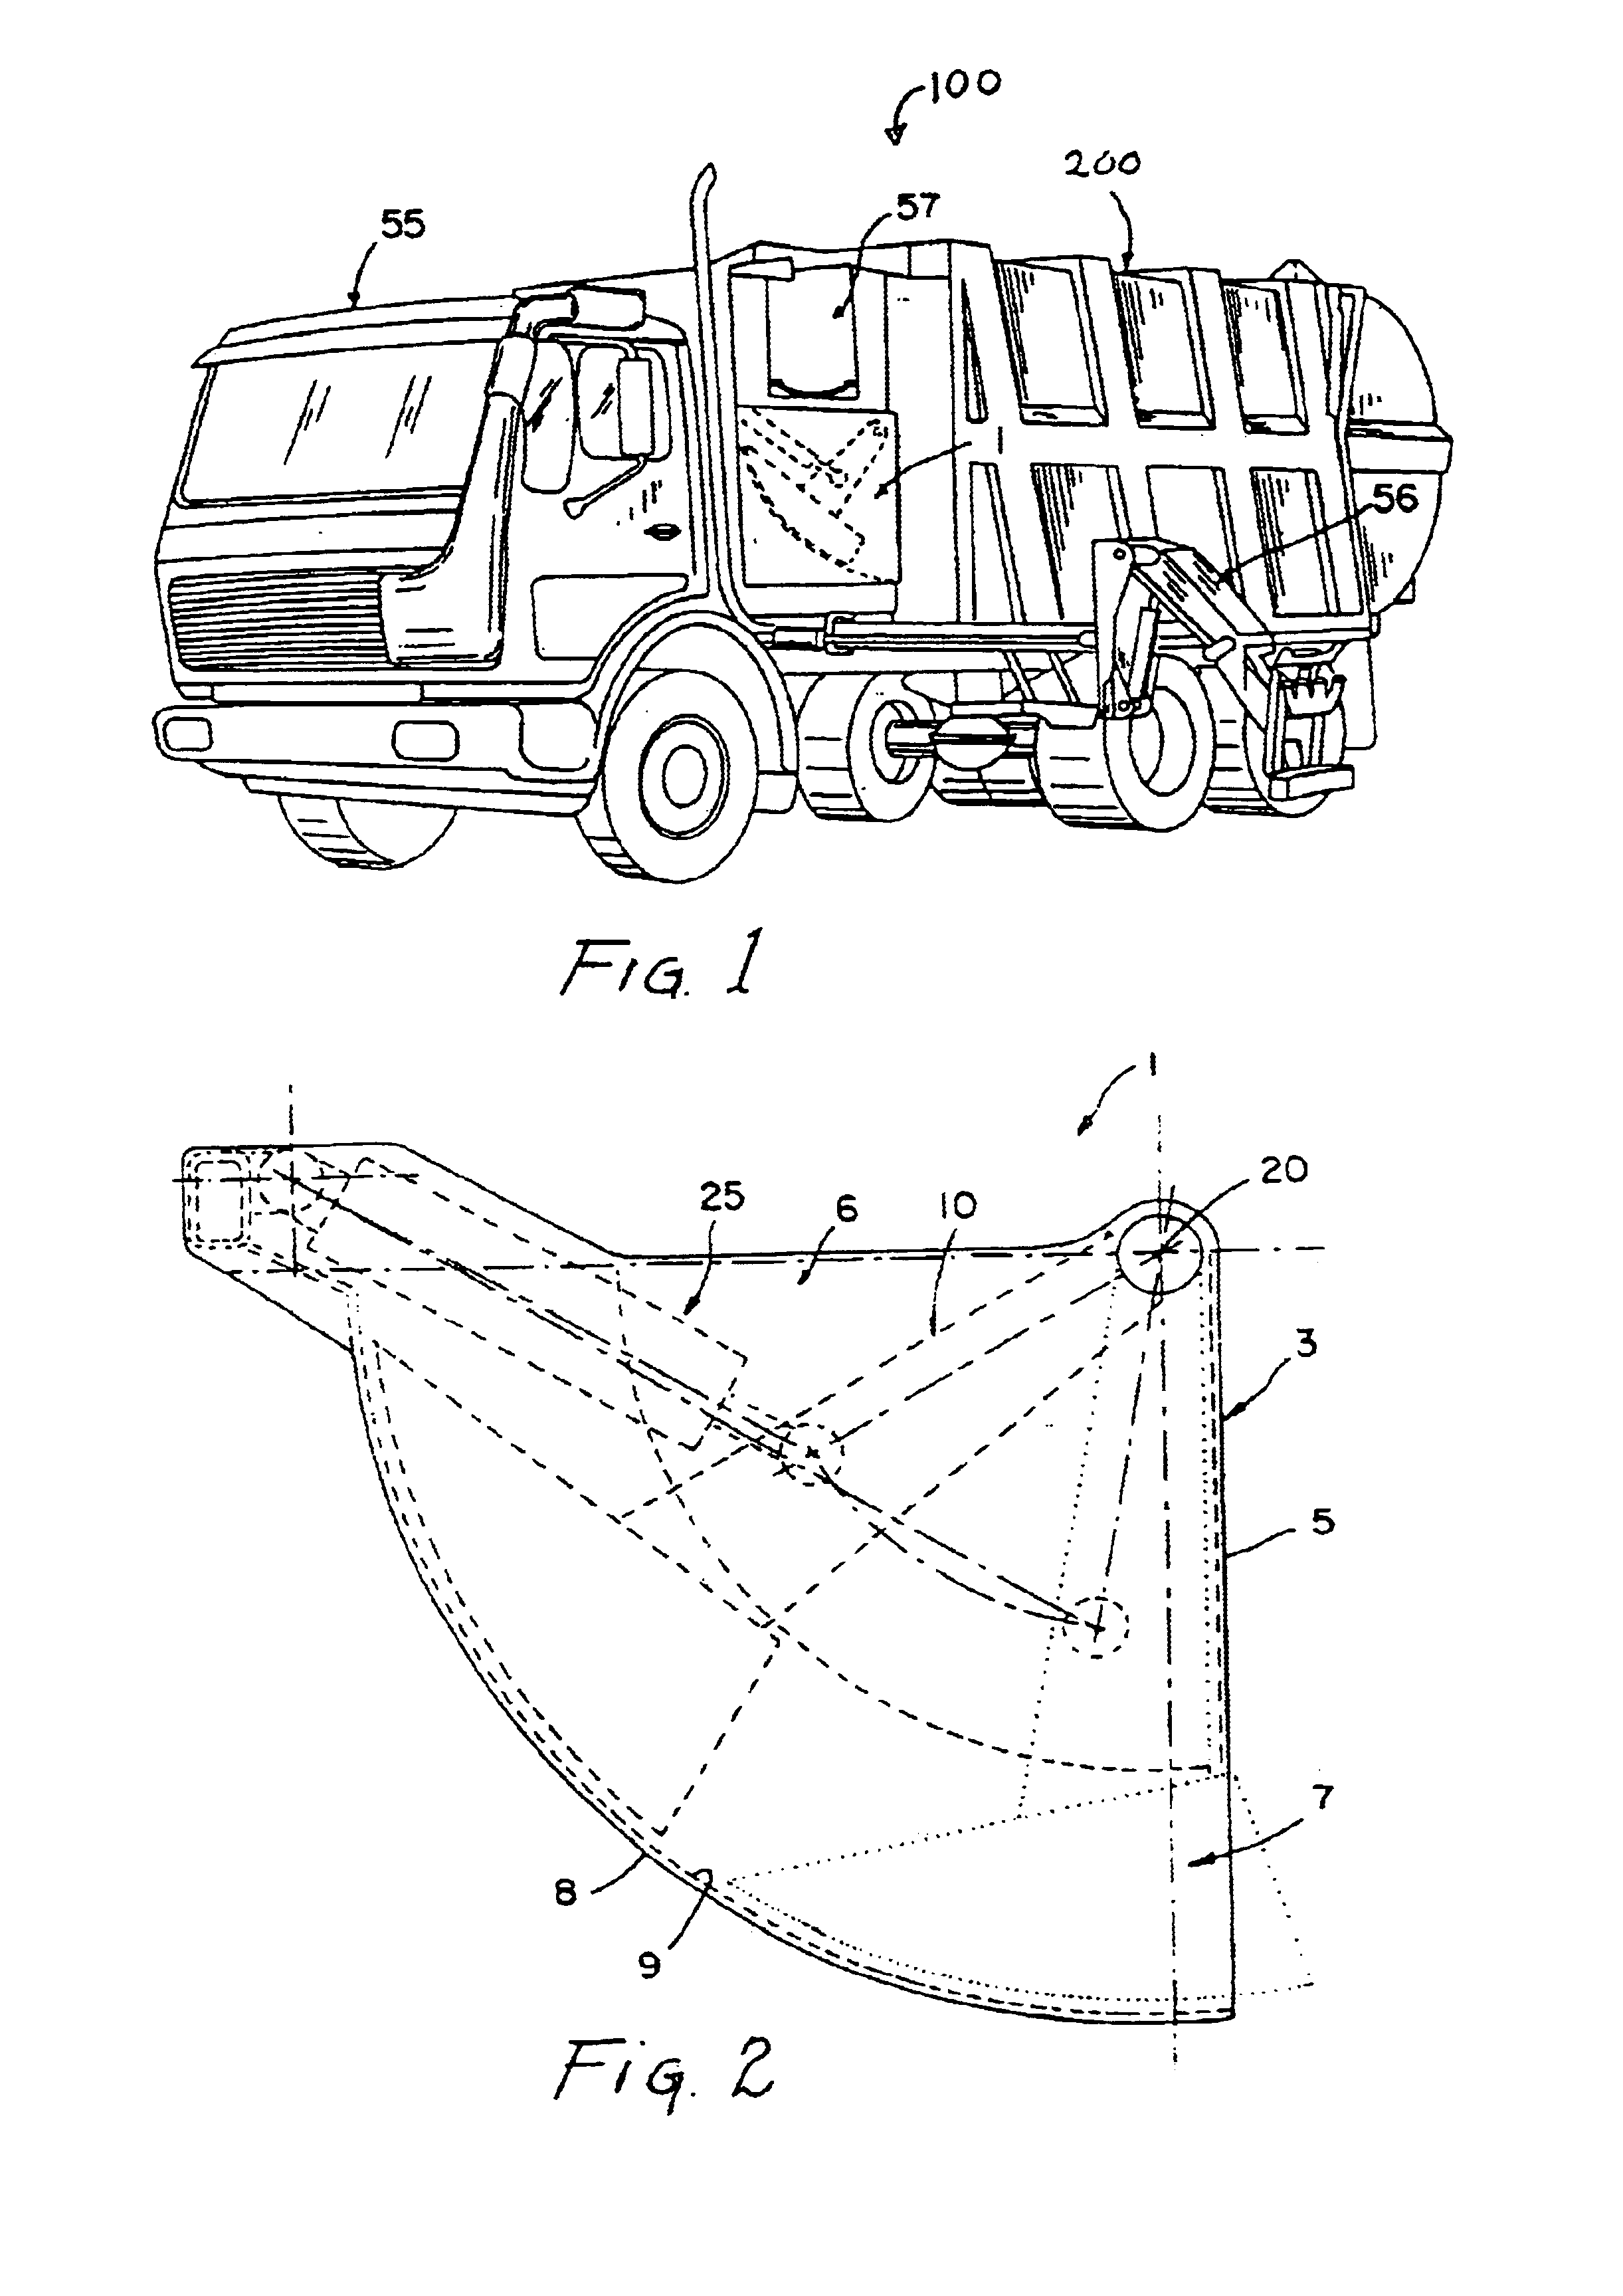 Refuse receptacle having a charging hopper and moving floor and method therefor